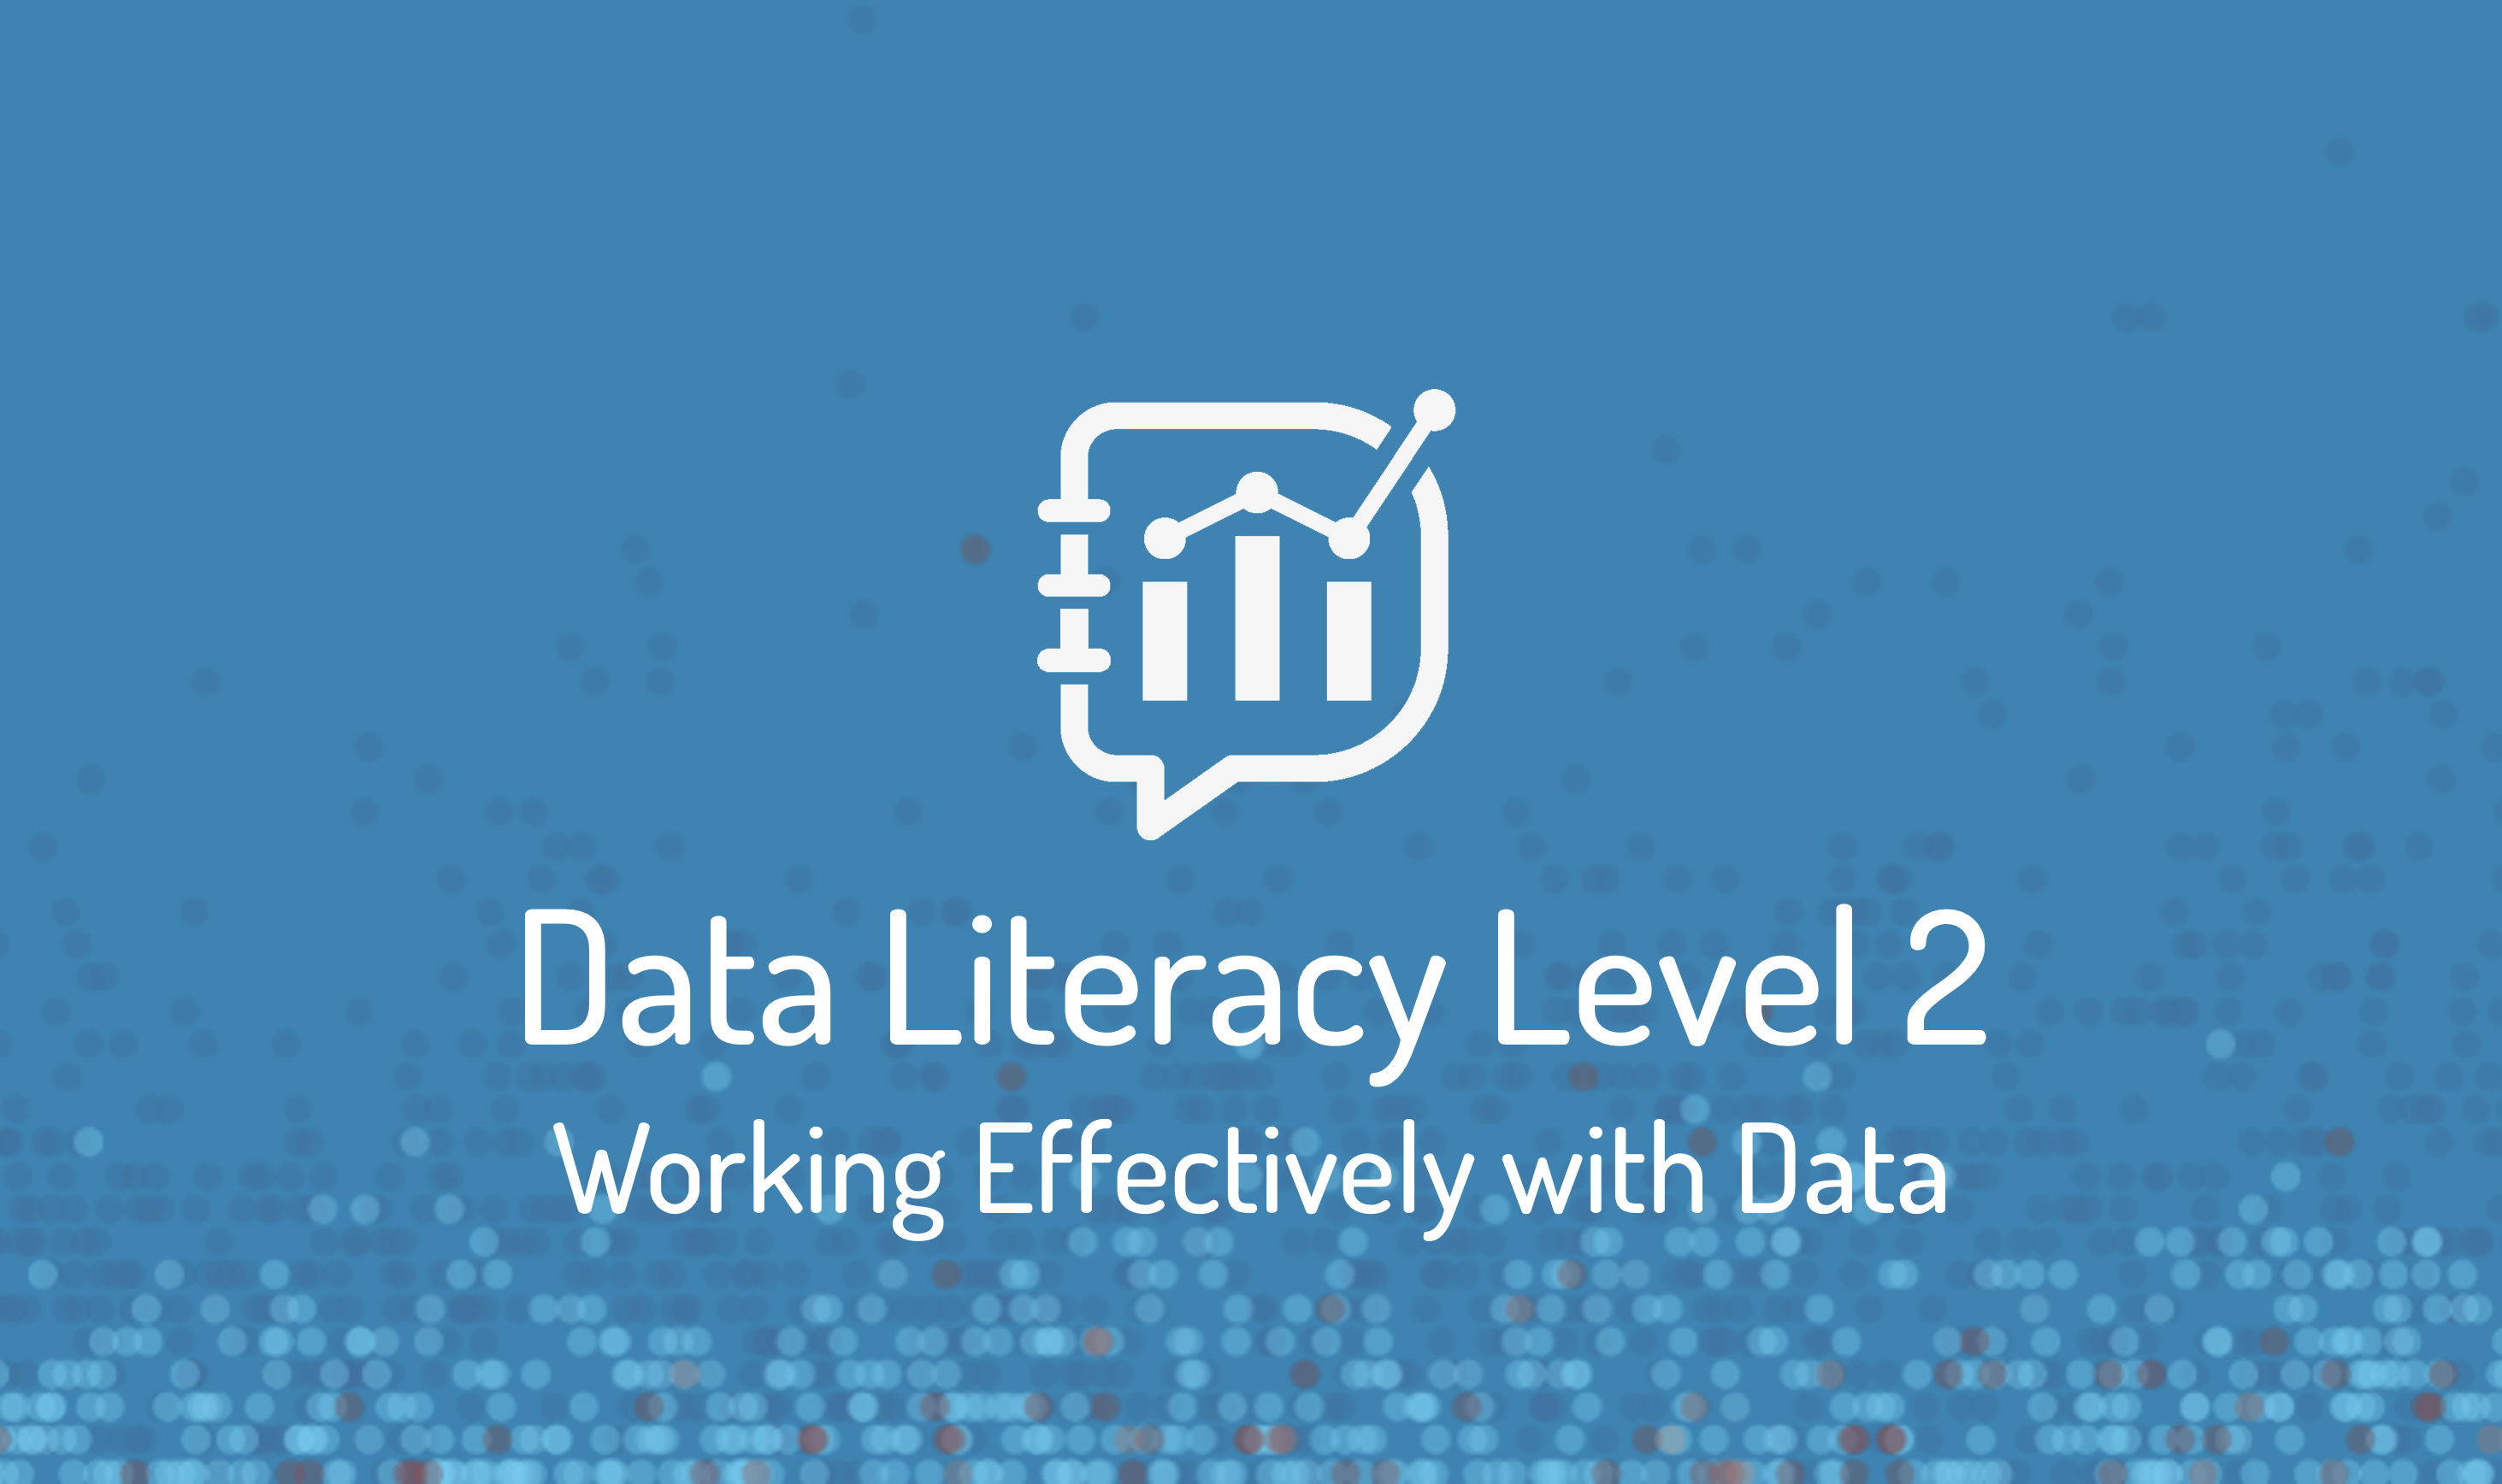 Featured image for the data literacy level 2 on-demand course. Dark blue background with dot plot. White data literacy logo. Beneath in white text it reads data literacy level 2 working effectively with data.